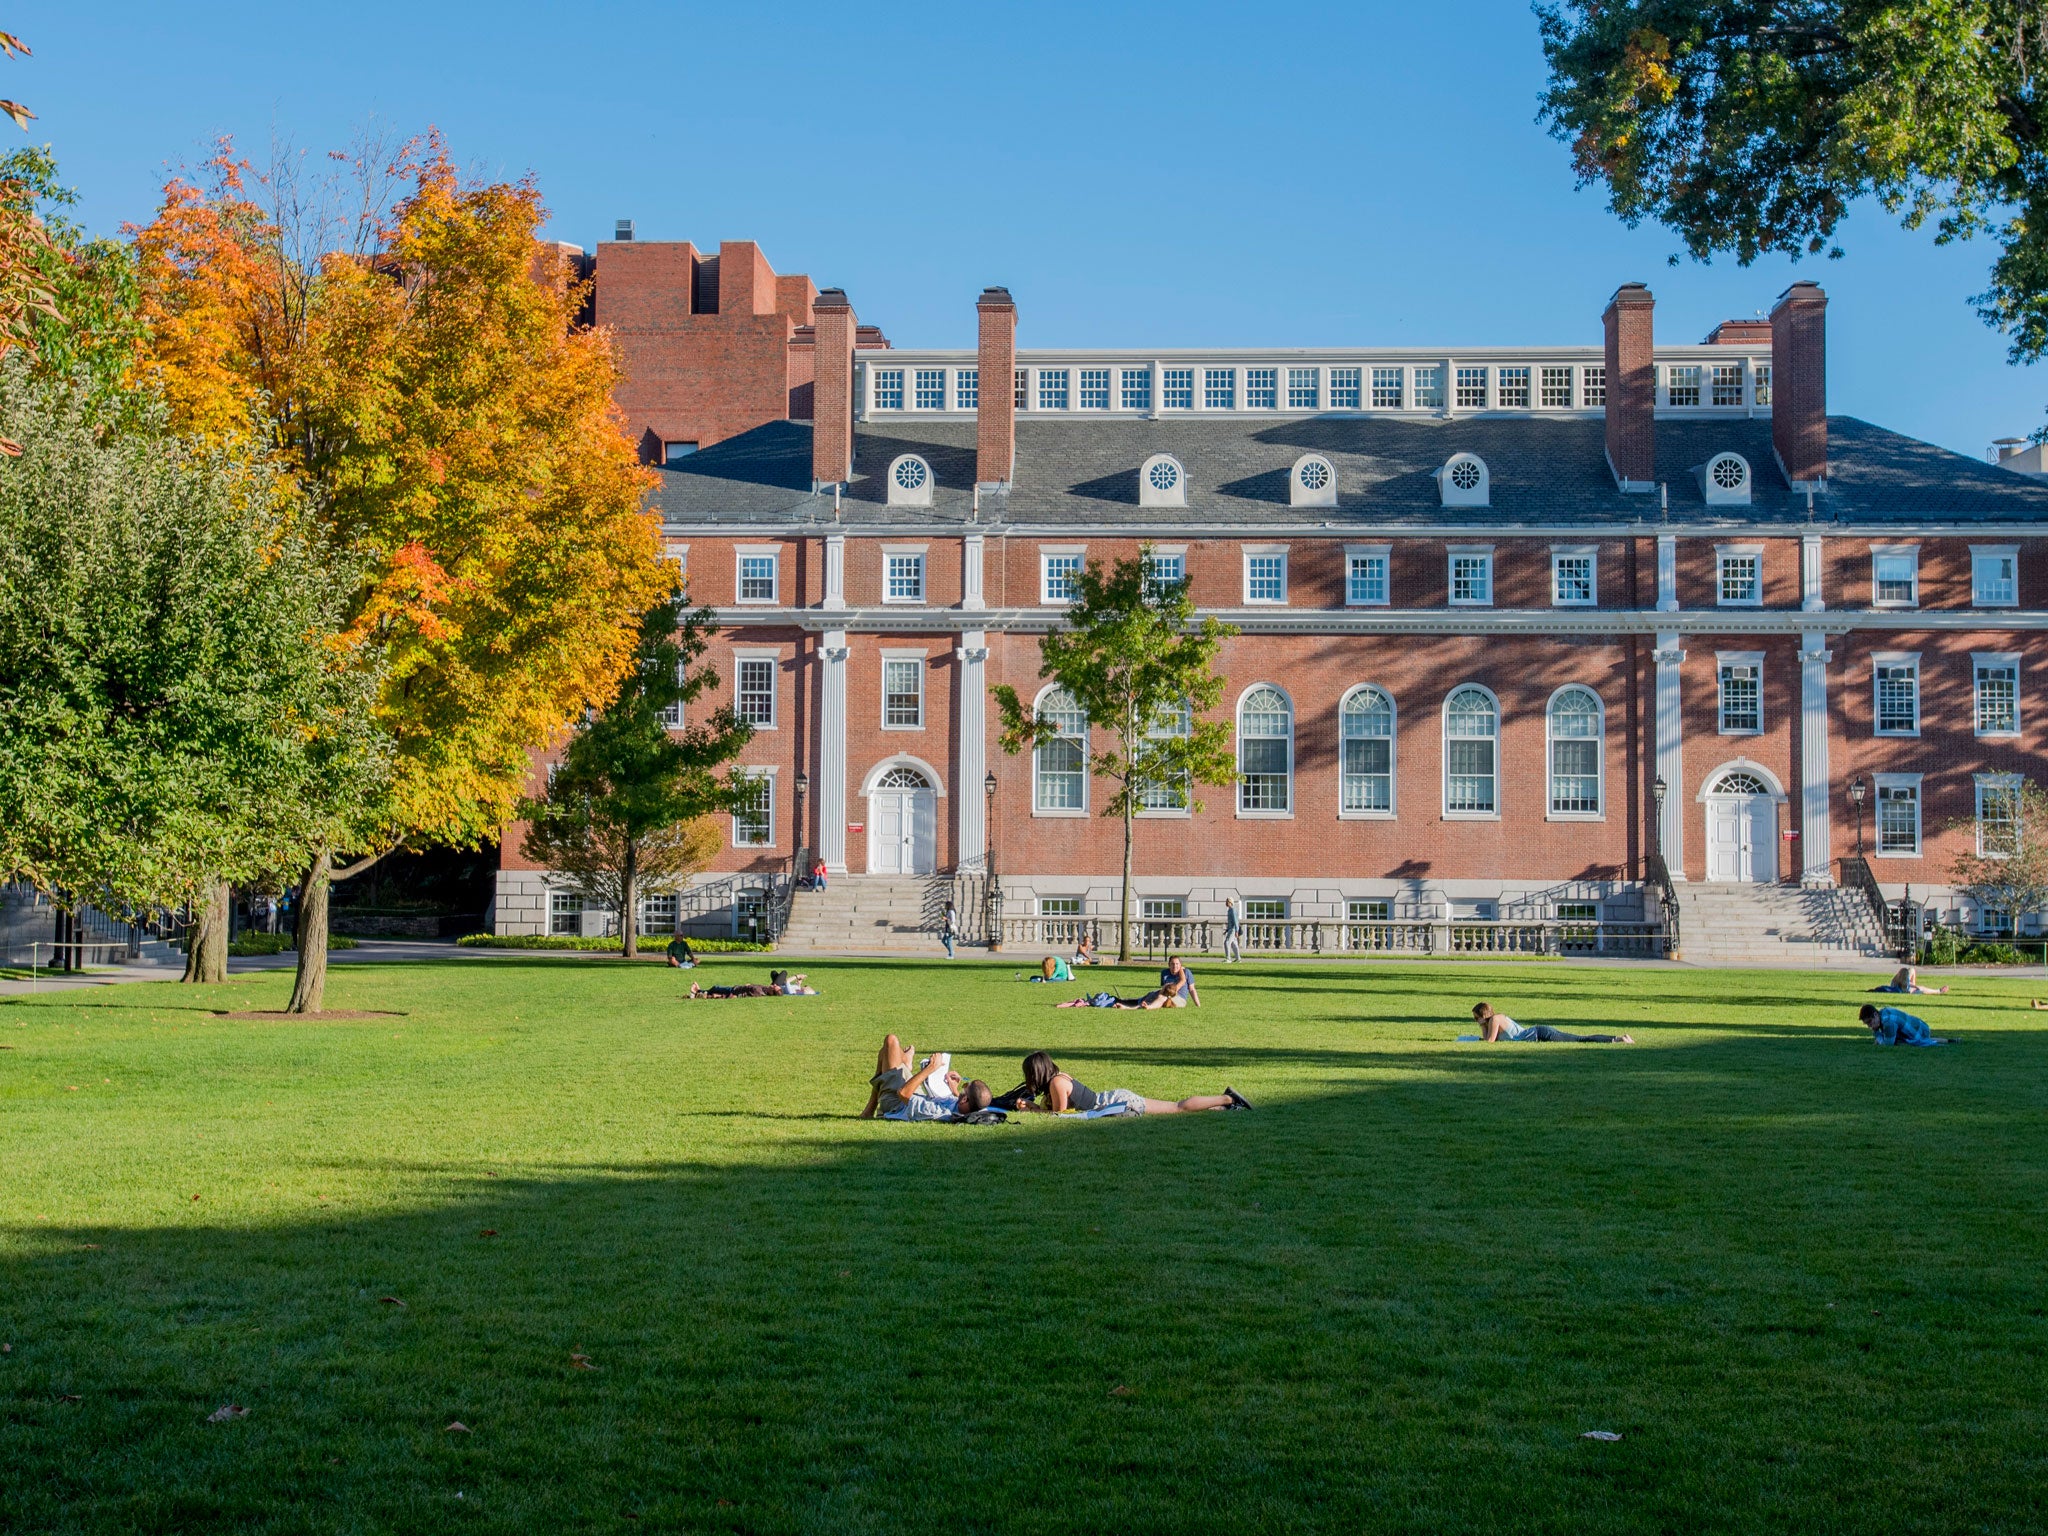 The club still represents a group of male Harvard students and alumni although it receives no funding from the university